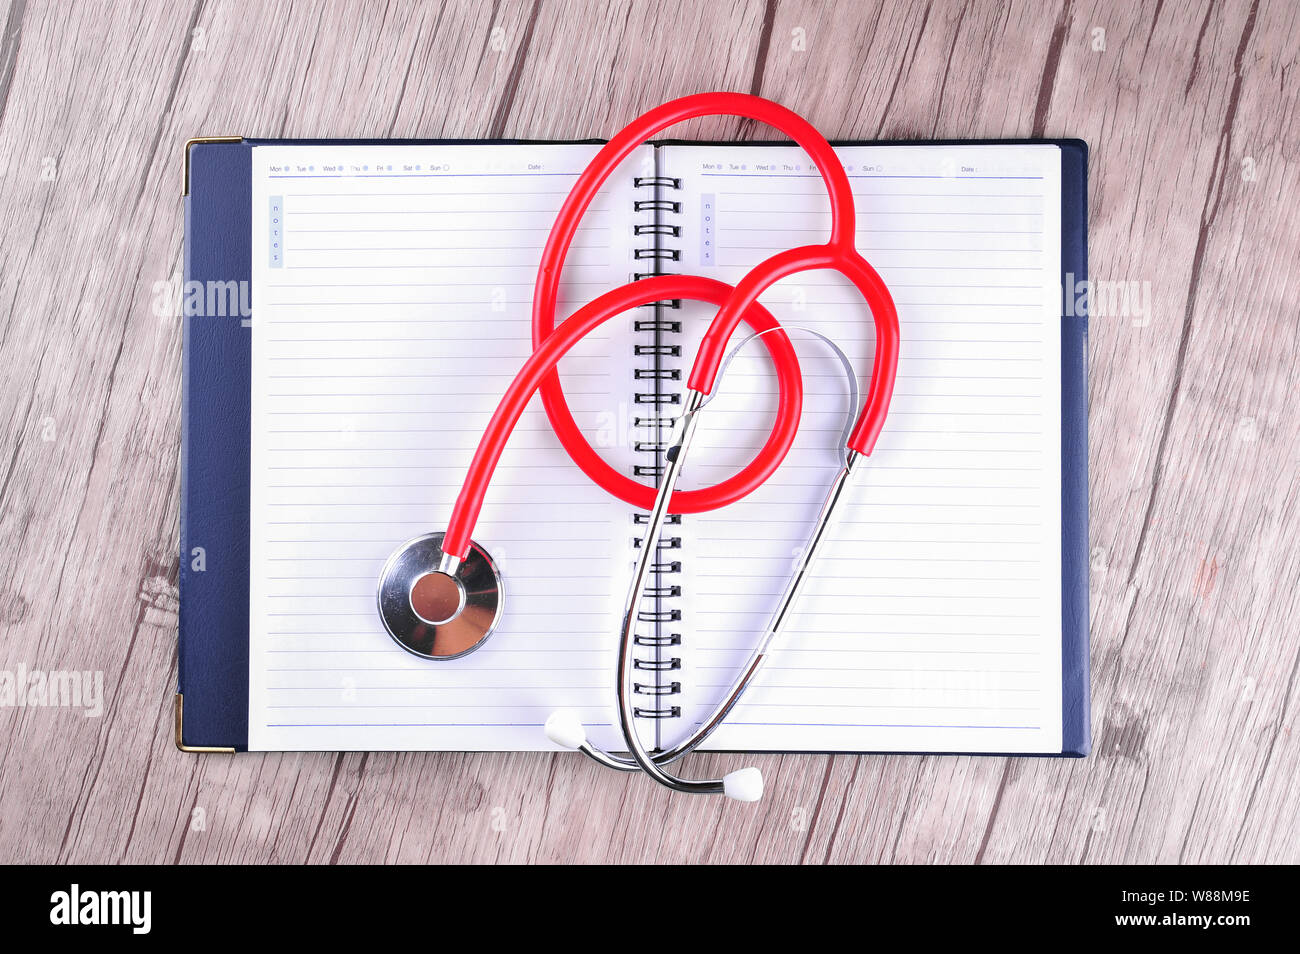 Stethoscope on diary books on wooden background Stock Photo